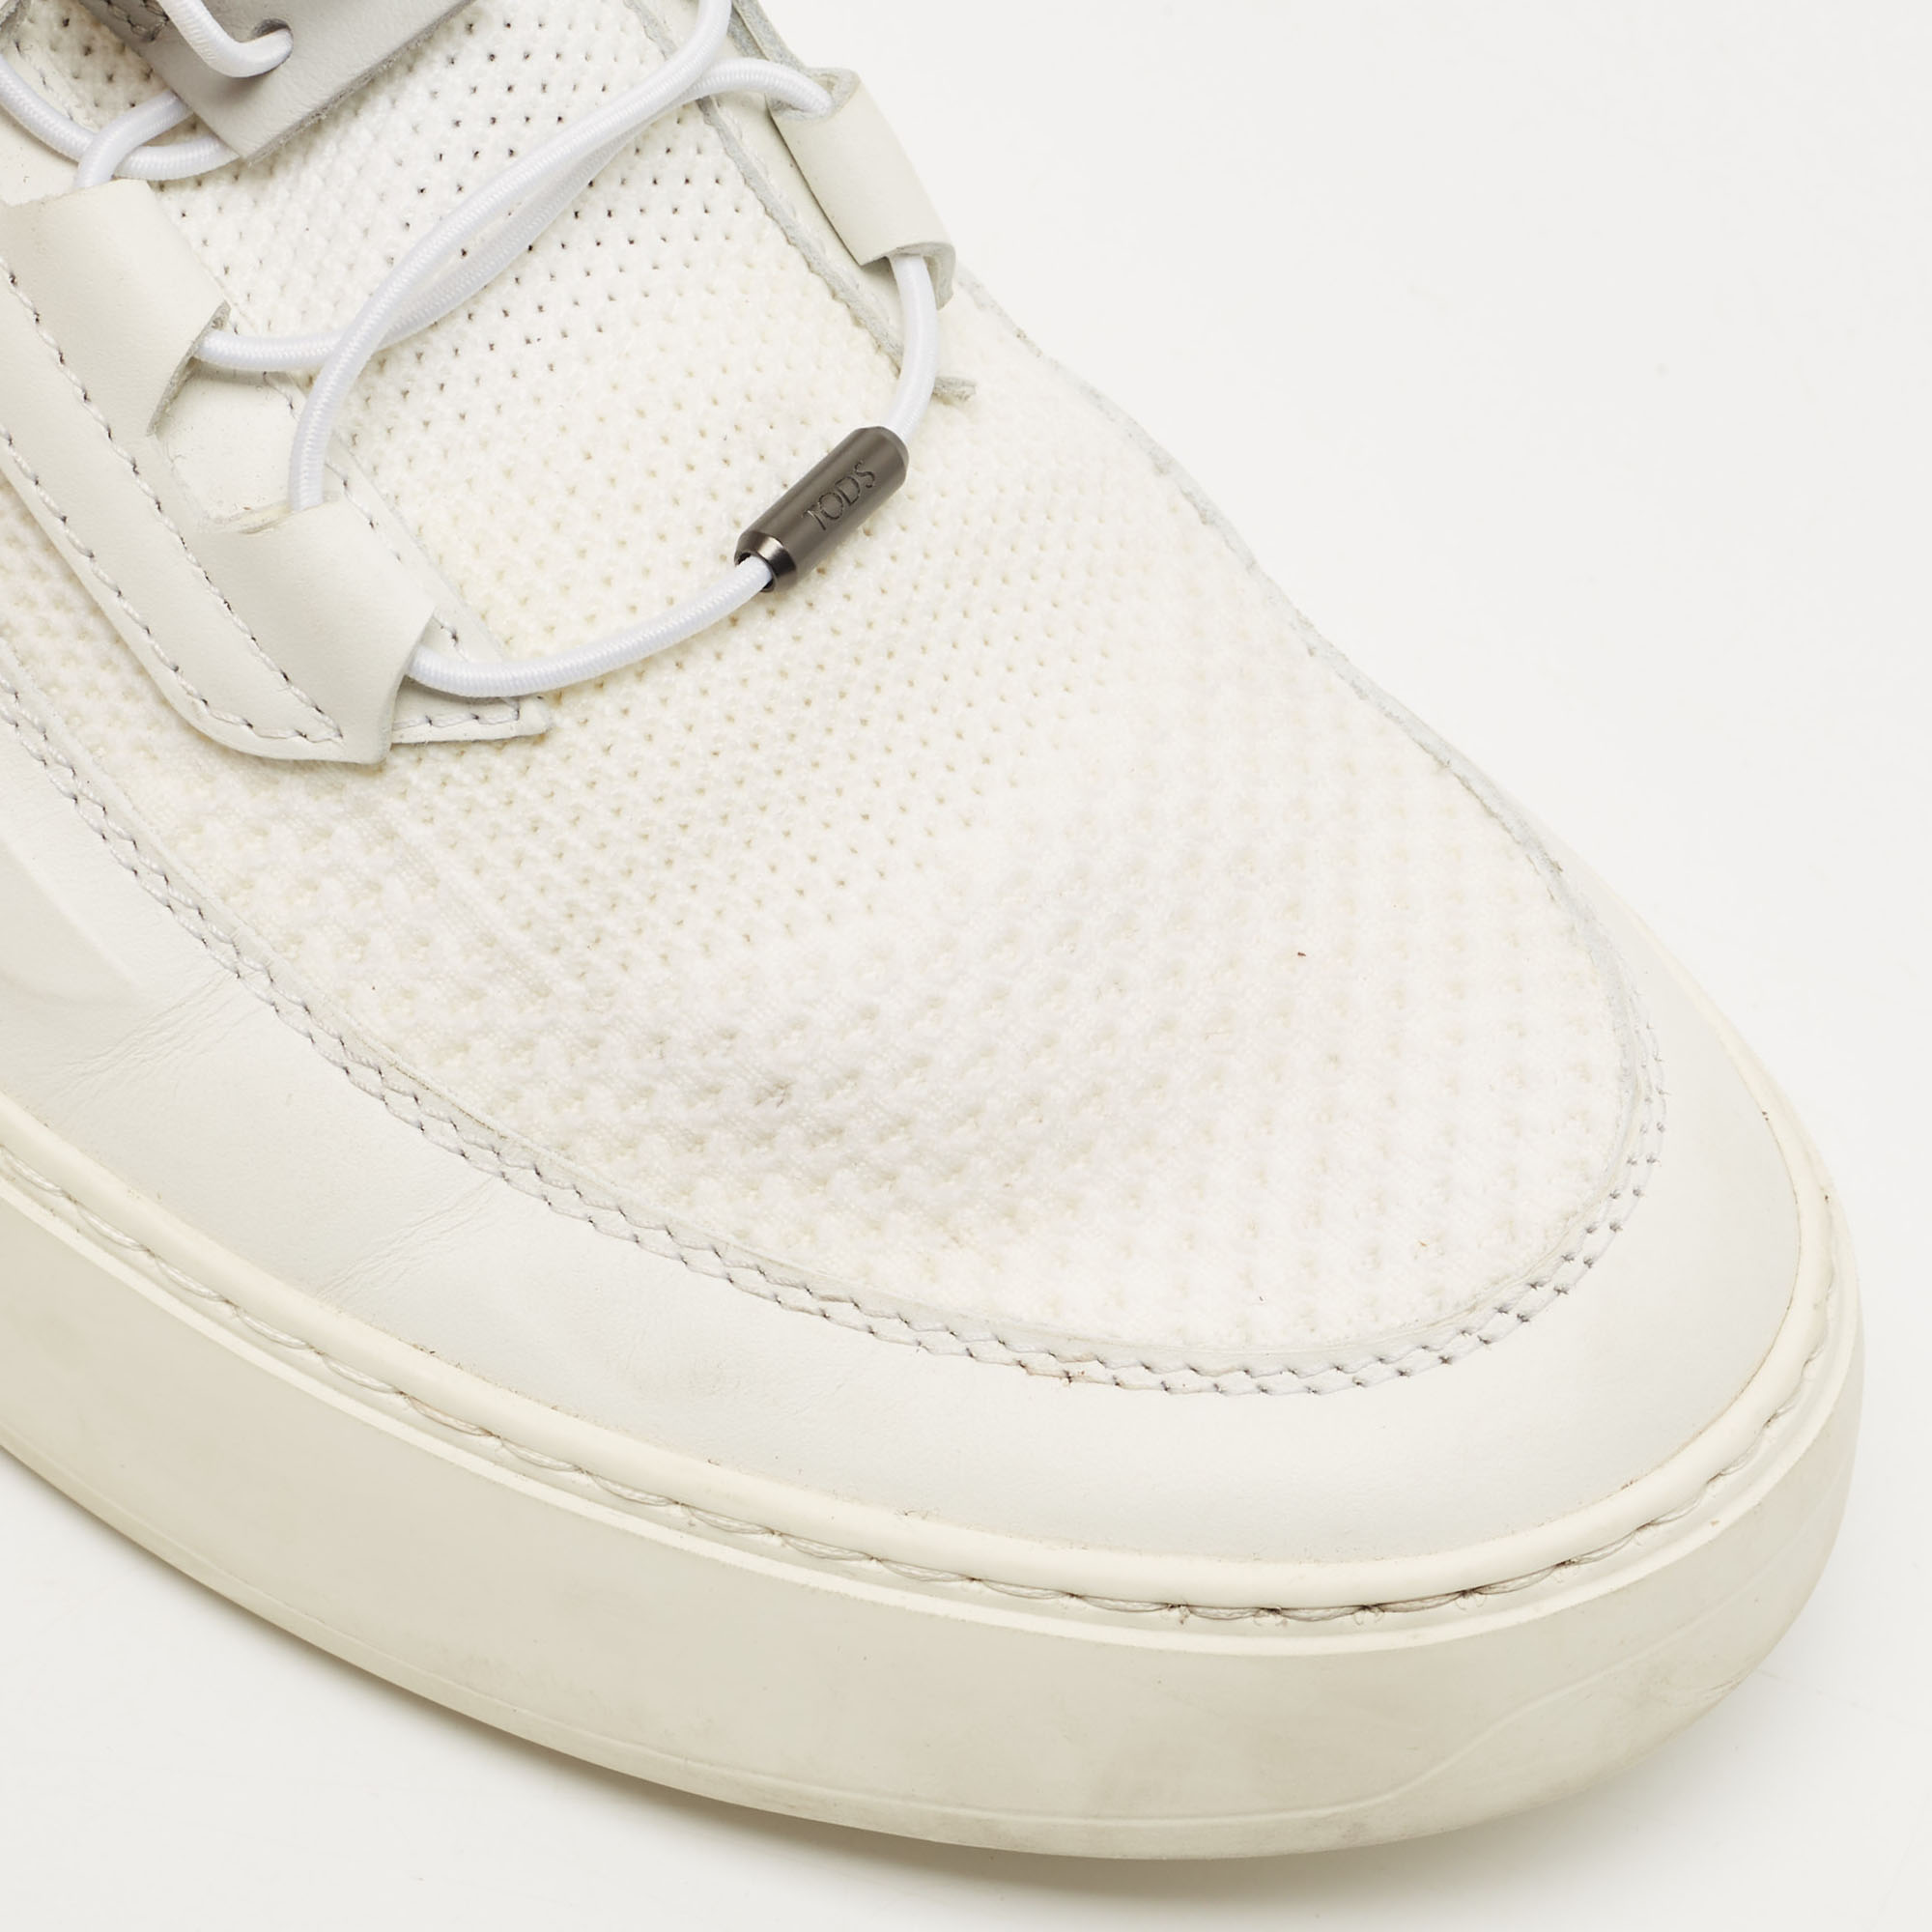 Tod's White Leather And Knit Fabric No_Code Sneakers Size 41.5